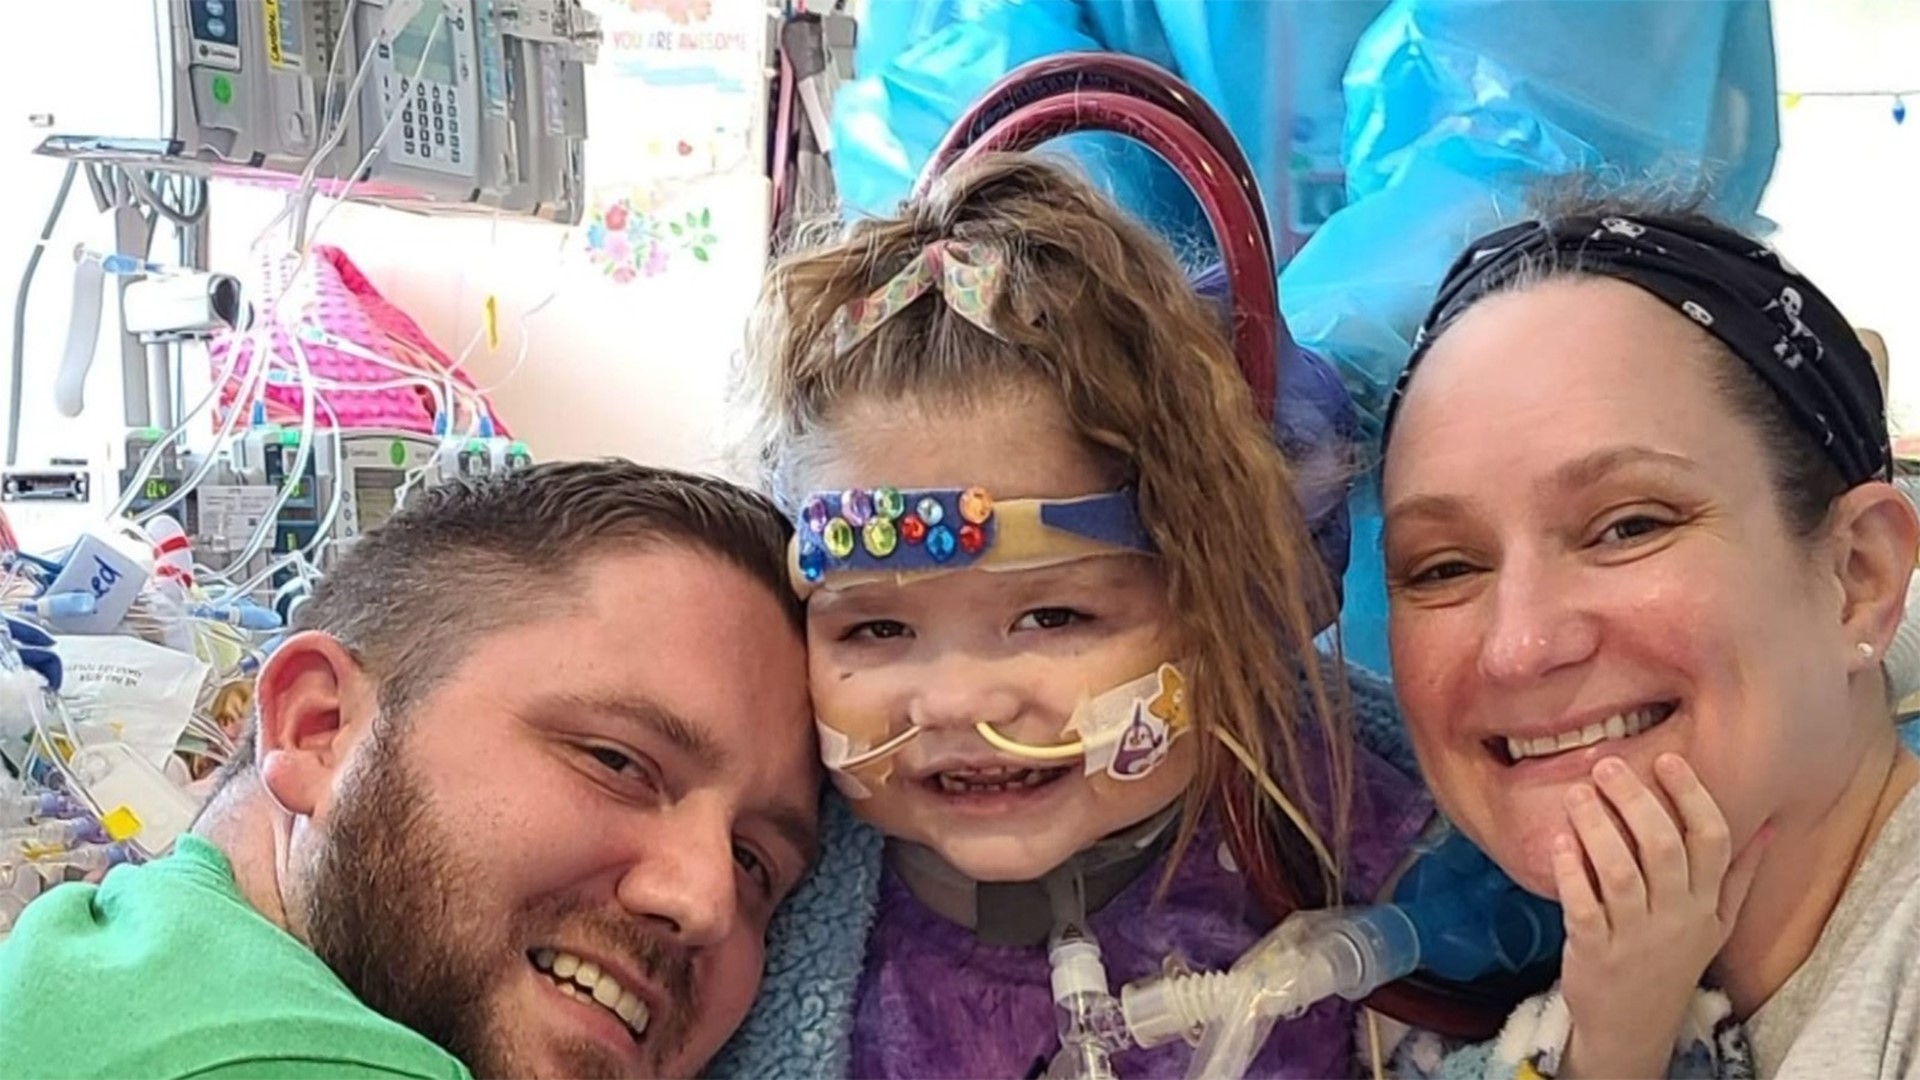 “Give her a Mardi Gras that she deserves being as sick as she’s been and what’s she’s been through,” said St. Tammany Parish Sheriff Randy Smith.